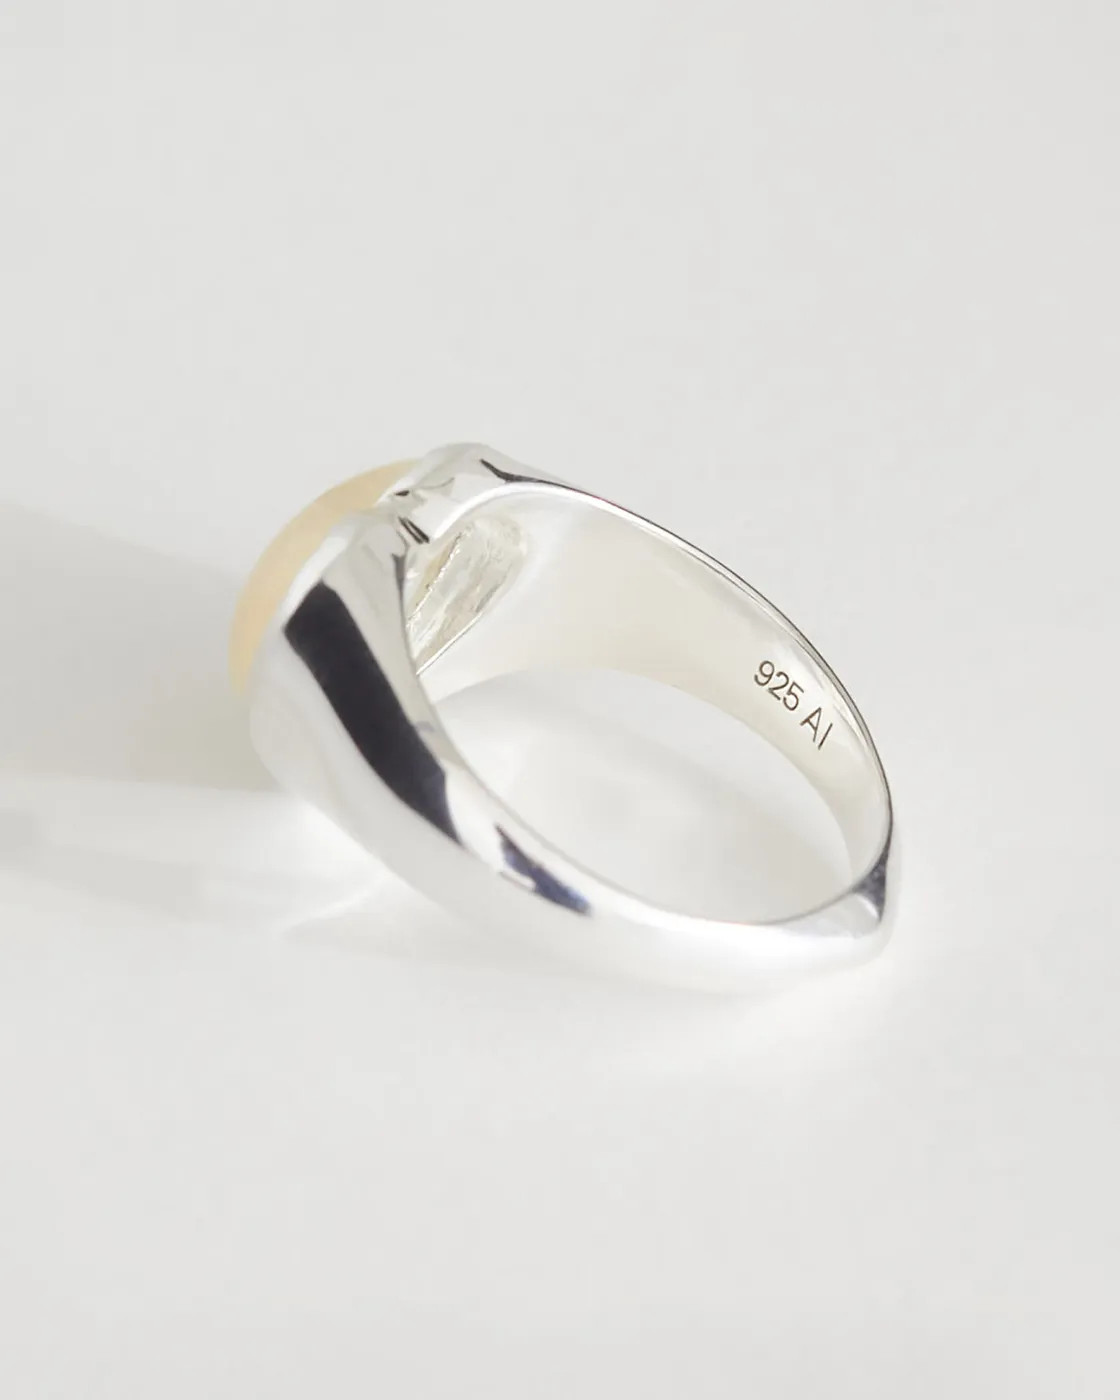 Mother of Pearl Heart Silver Ring